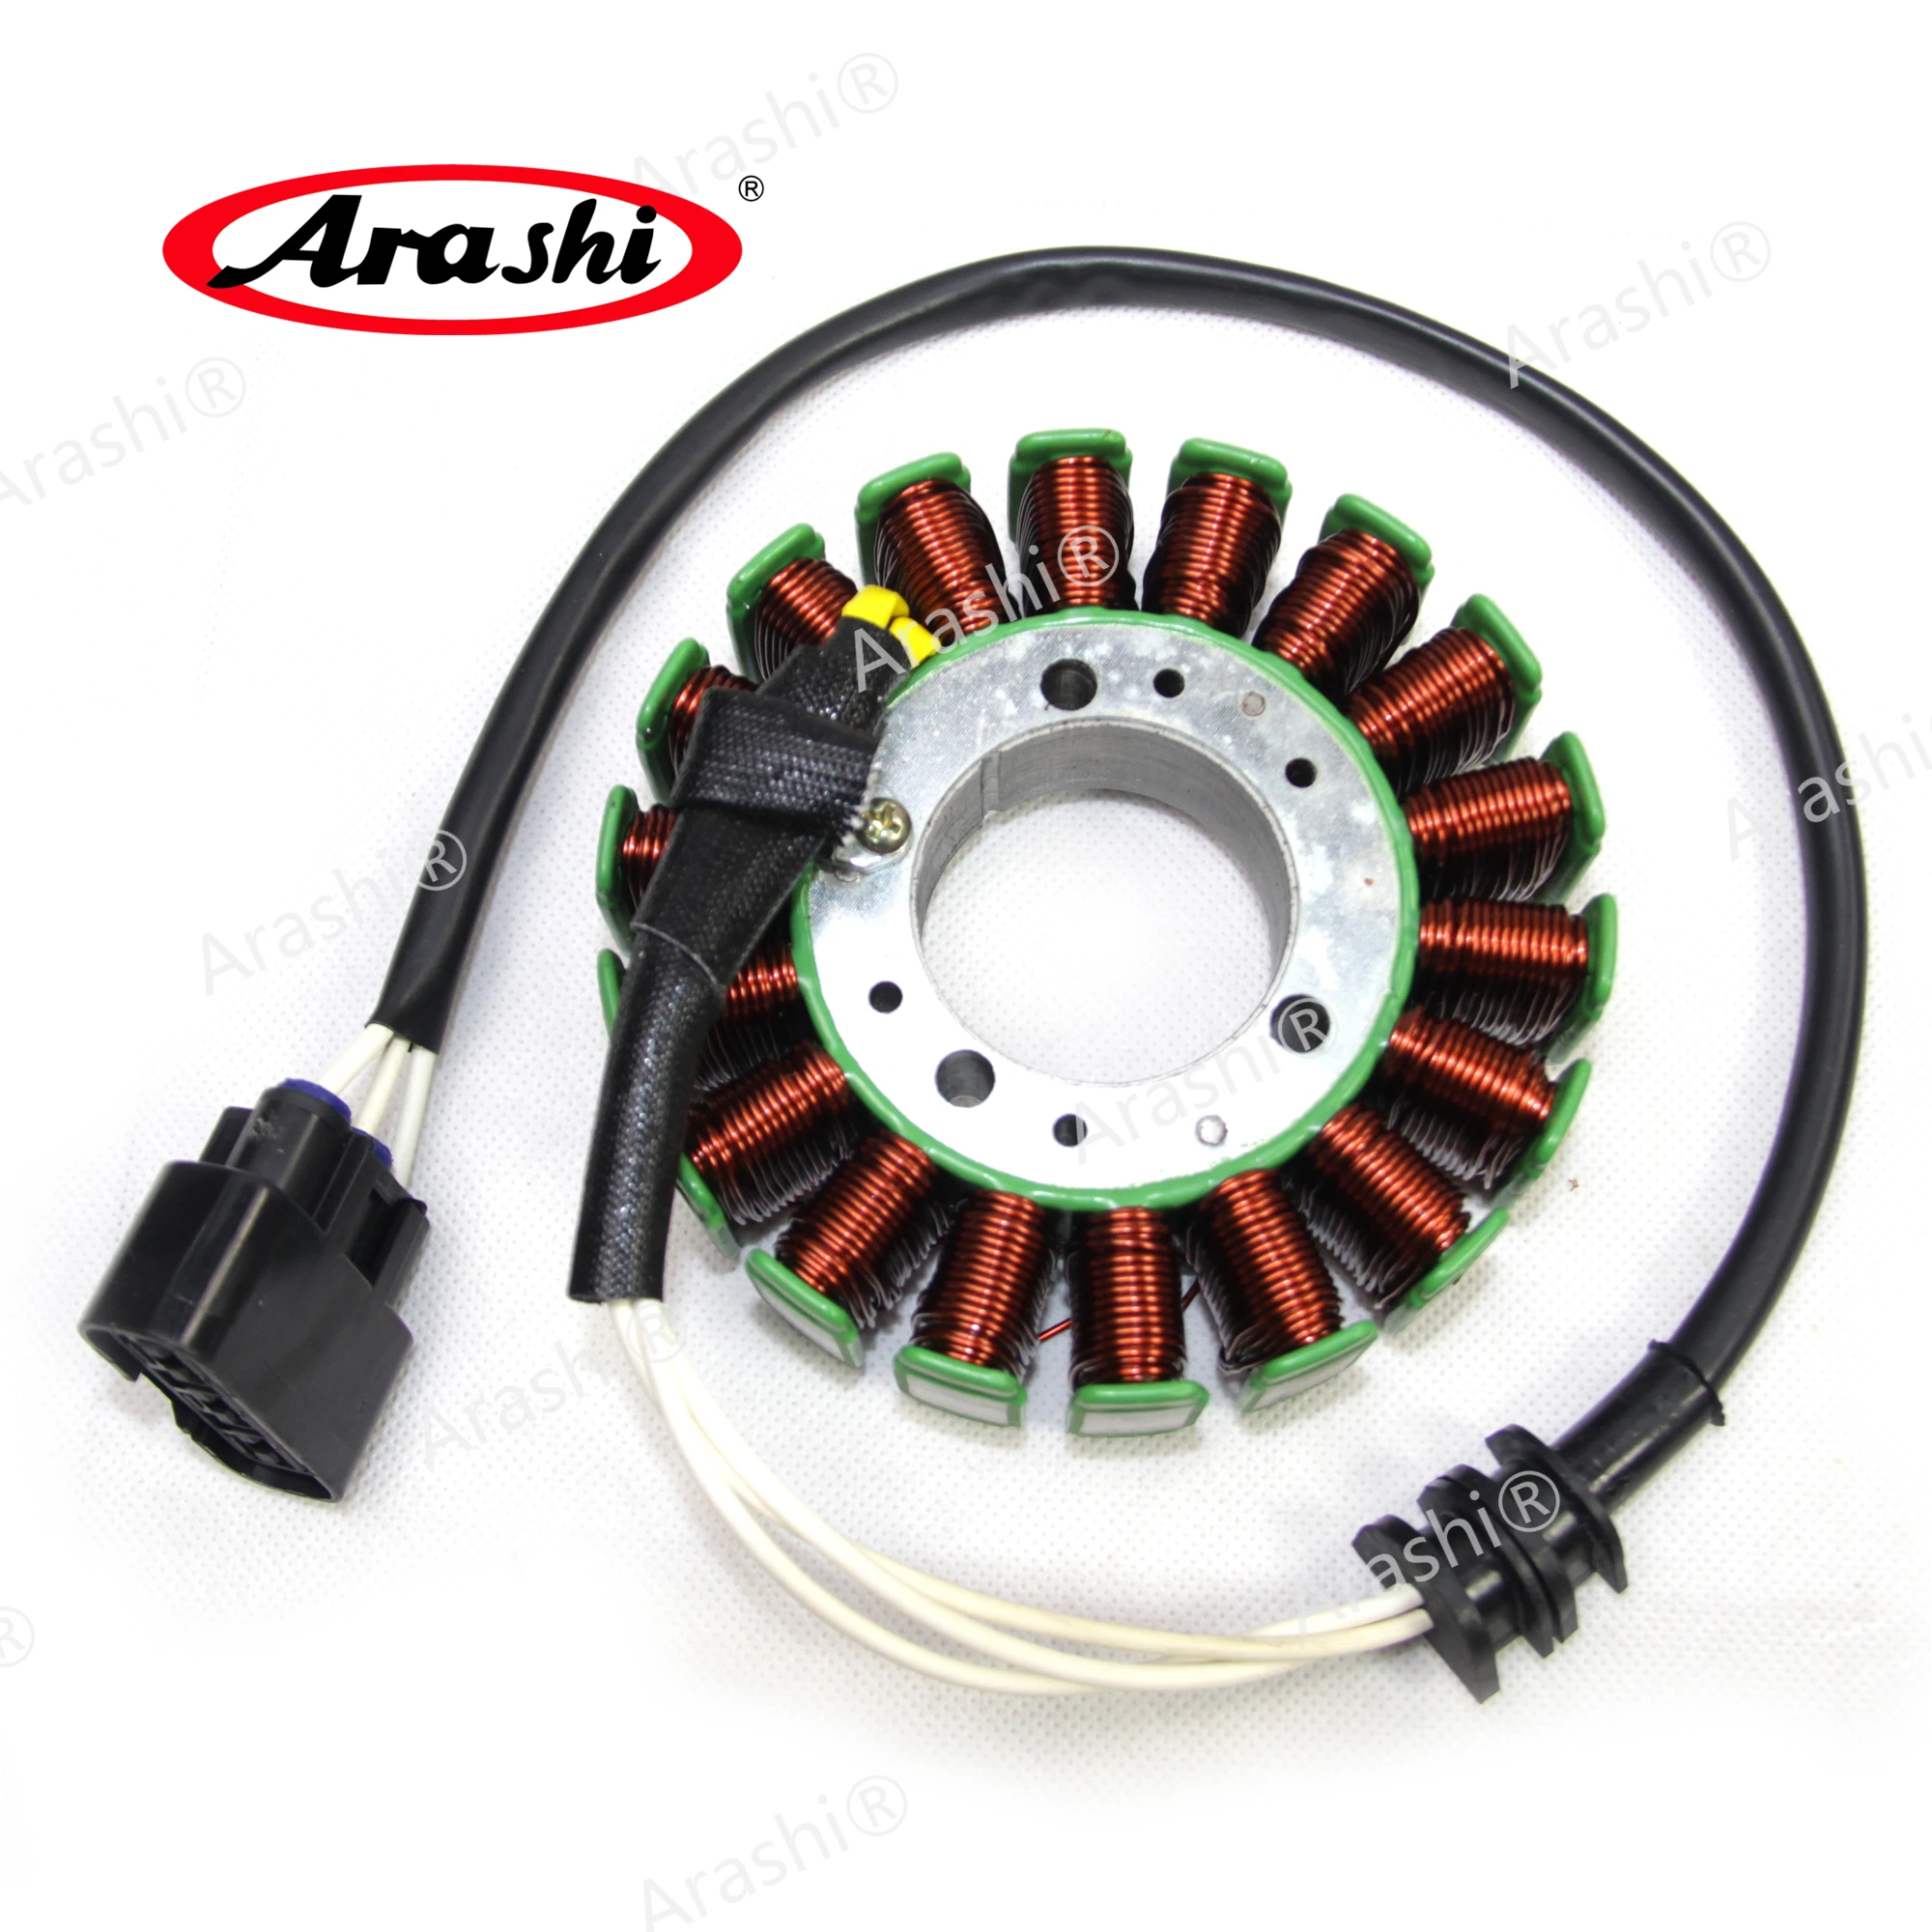 

Magneto Generator Alternator Engine Stator Charging Coil For Yamaha YZF R1 YZFR1 YZF-R1 2002 2003 02 03 Motorcycle Accessories